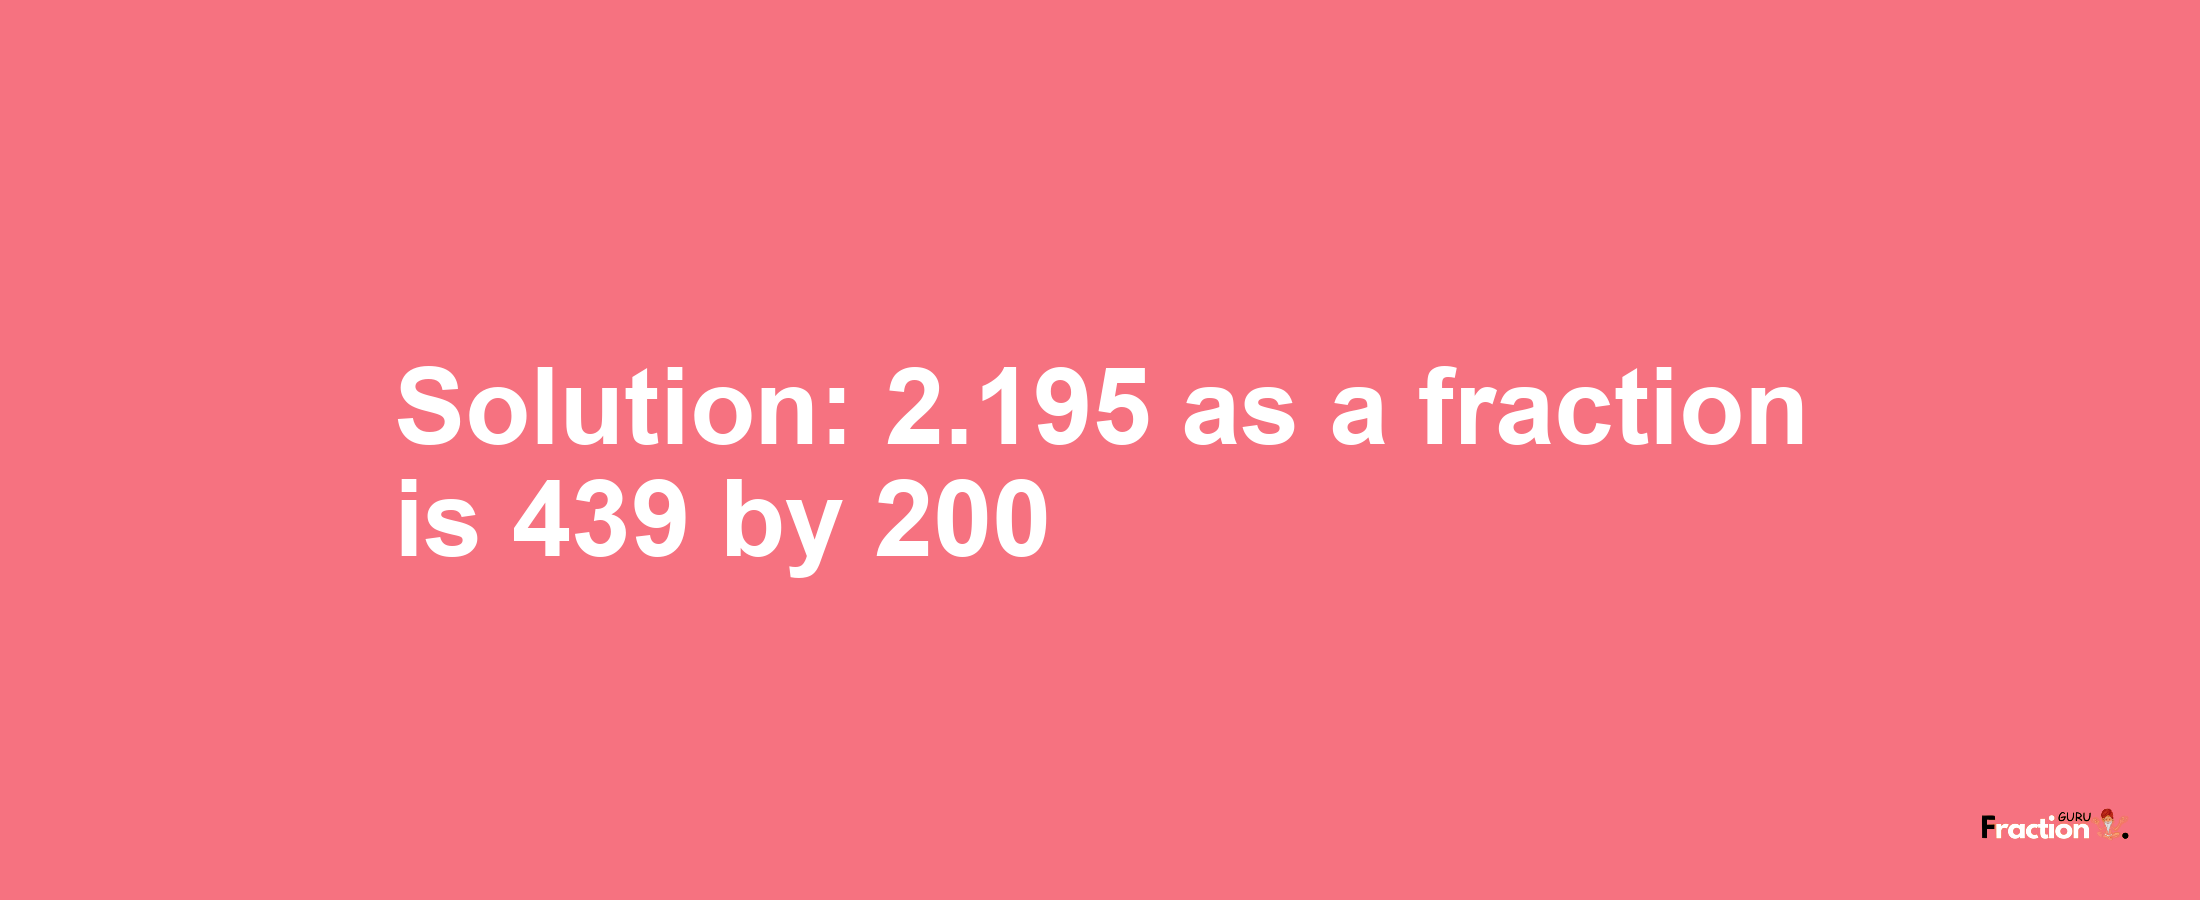 Solution:2.195 as a fraction is 439/200